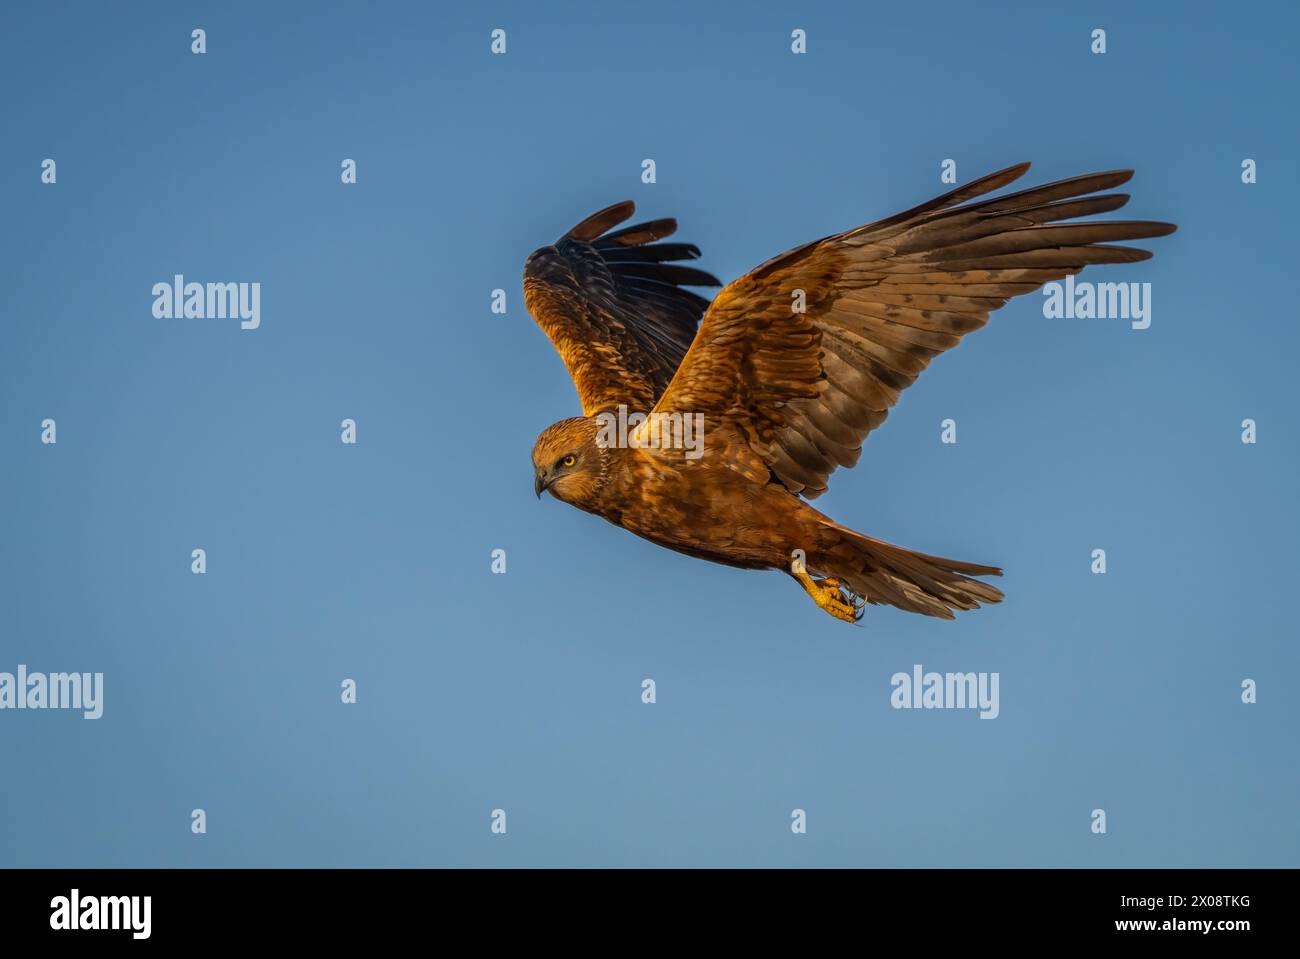 An impressive bird of prey is captured in mid-flight against the clear blue sky of the fields of Lleida, displaying its widespread wings and focused g Stock Photo